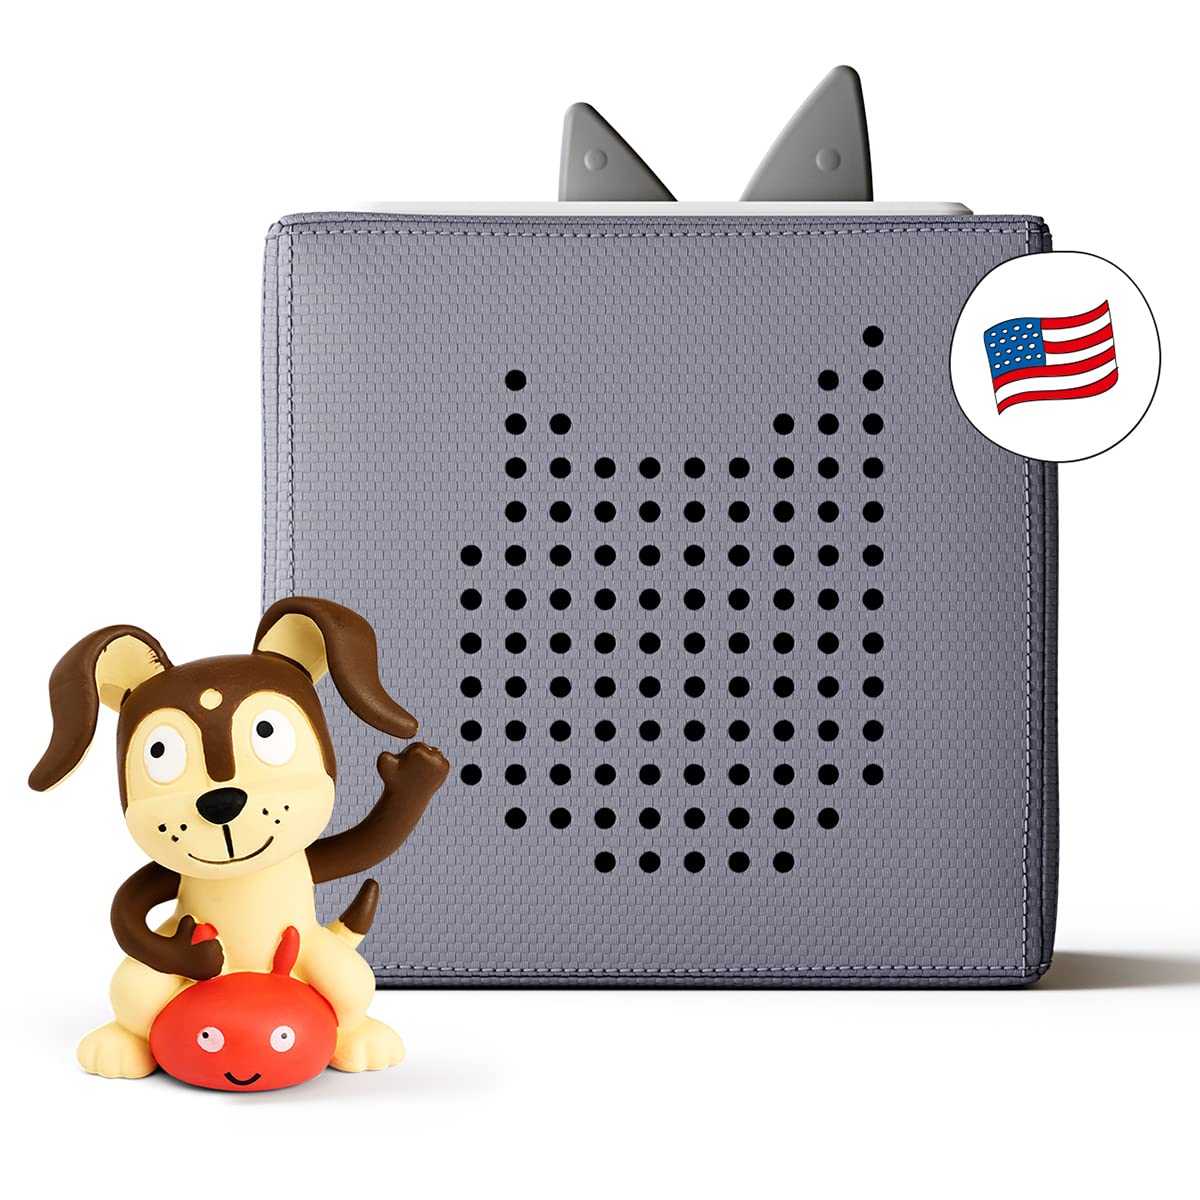 Tonies Toniebox Audio Player Starter Set with Playtime Puppy - Listen, Learn, and Play with One Huggable Little Box